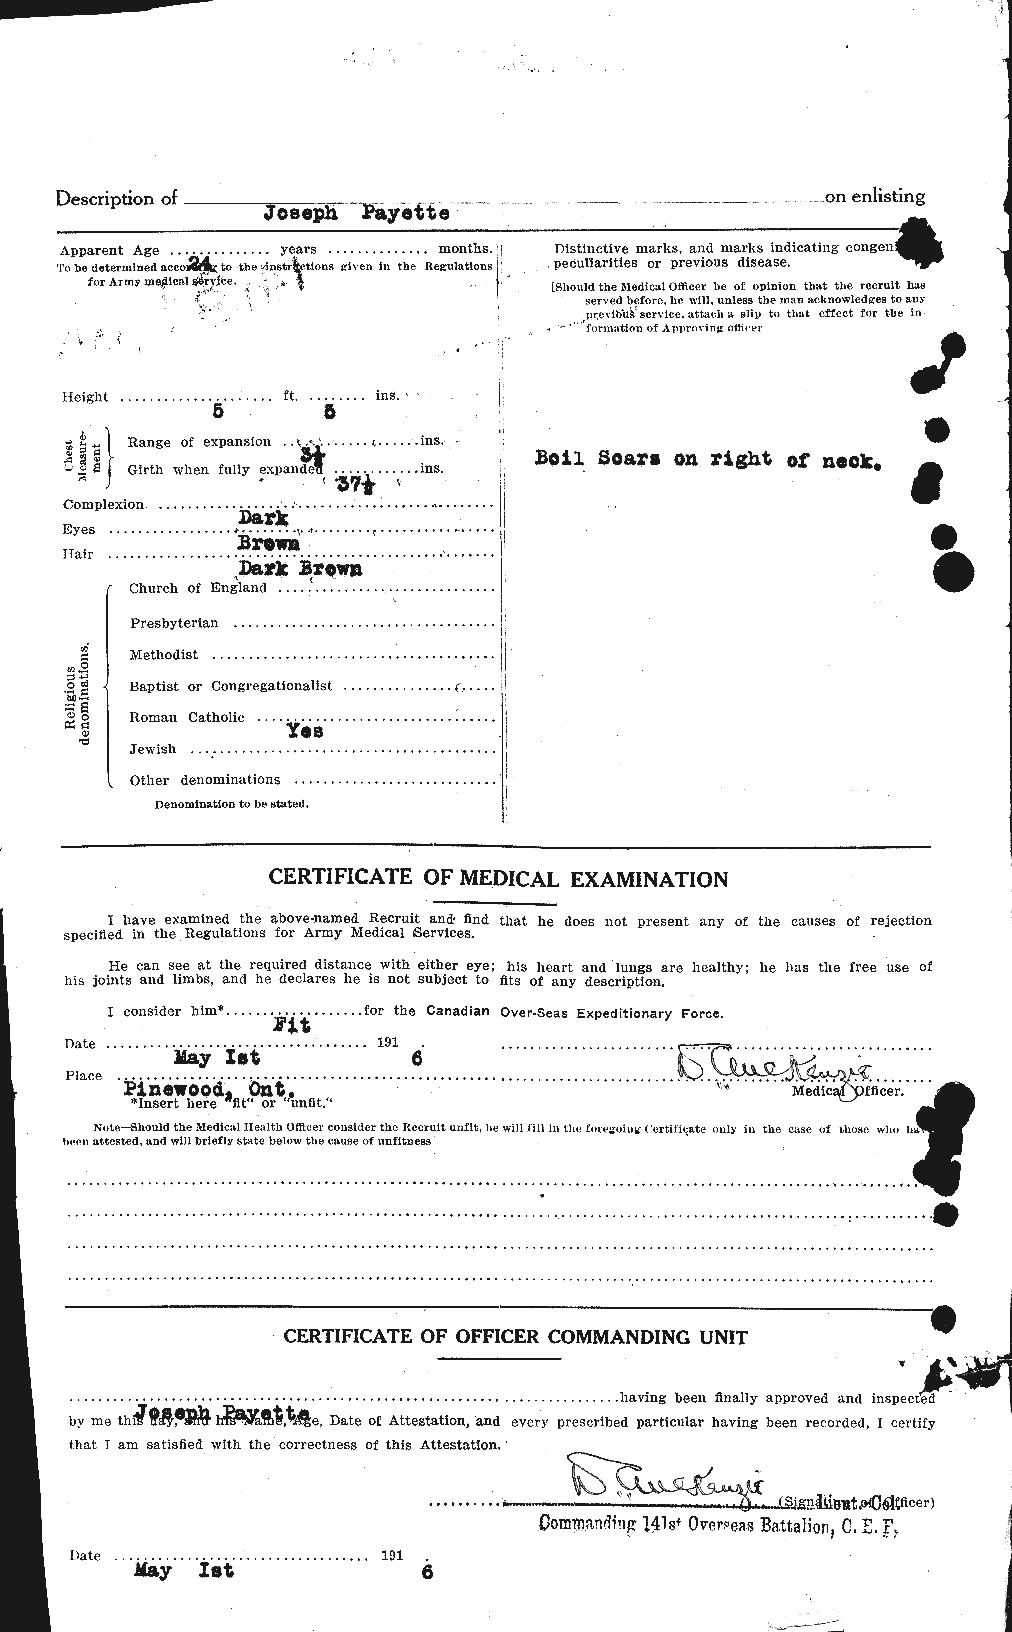 Personnel Records of the First World War - CEF 569750b